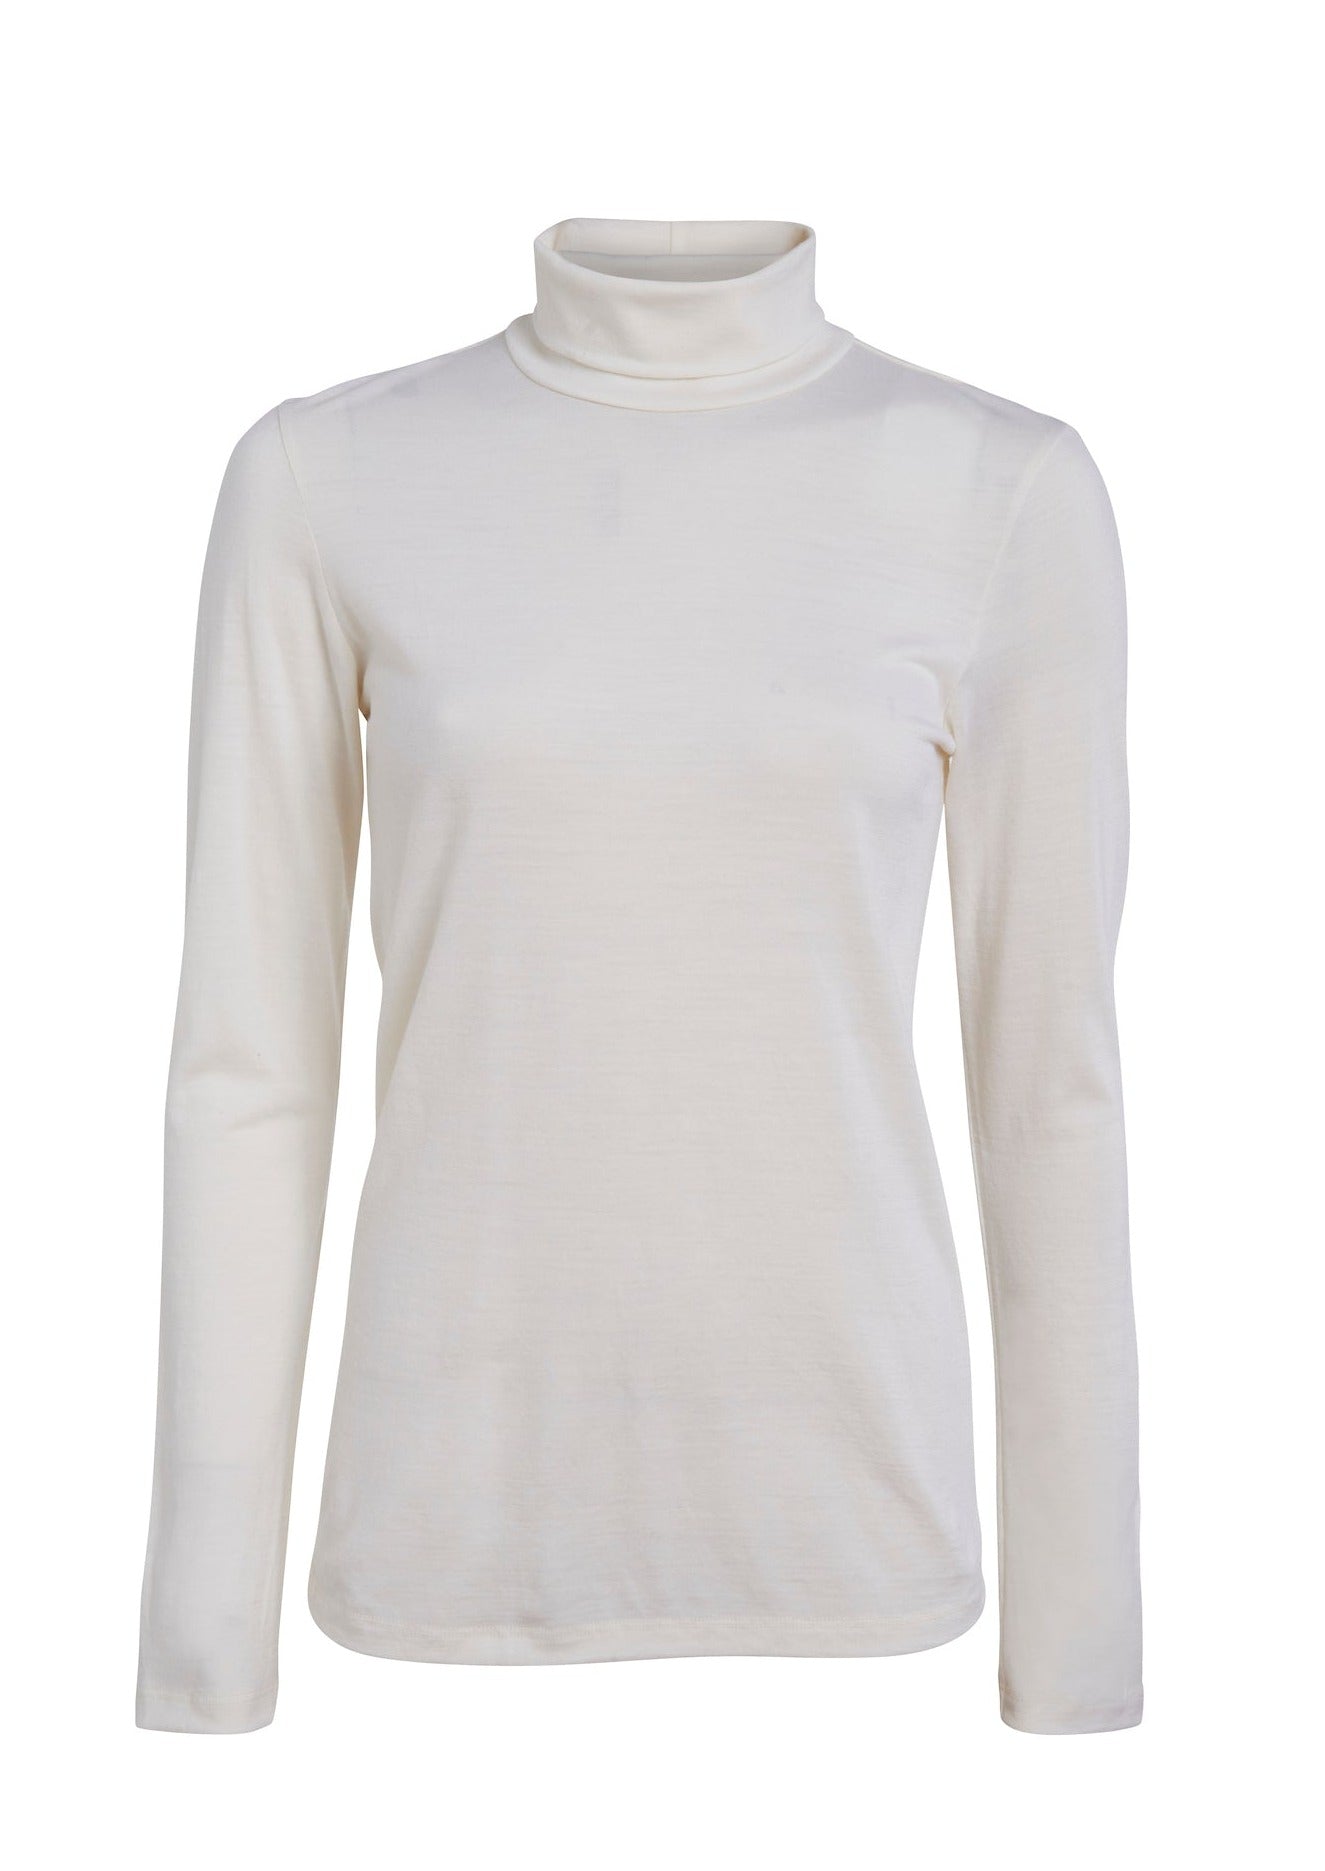 A timeless turtleneck, this layering essential in ethical wool is soft and breathable to wear all seasons.